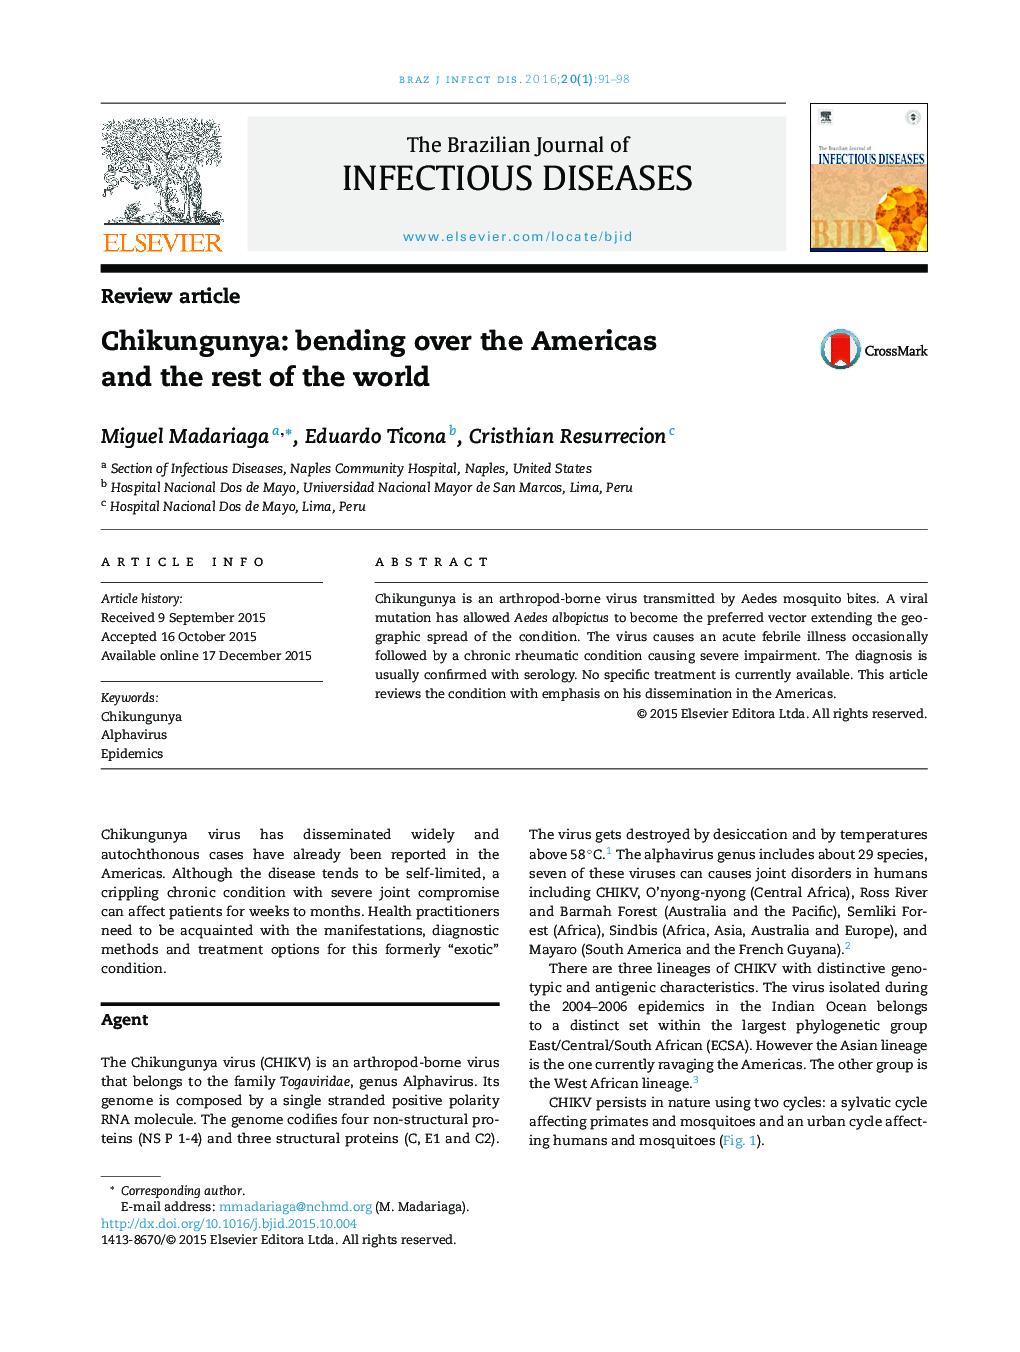 Chikungunya: bending over the Americas and the rest of the world